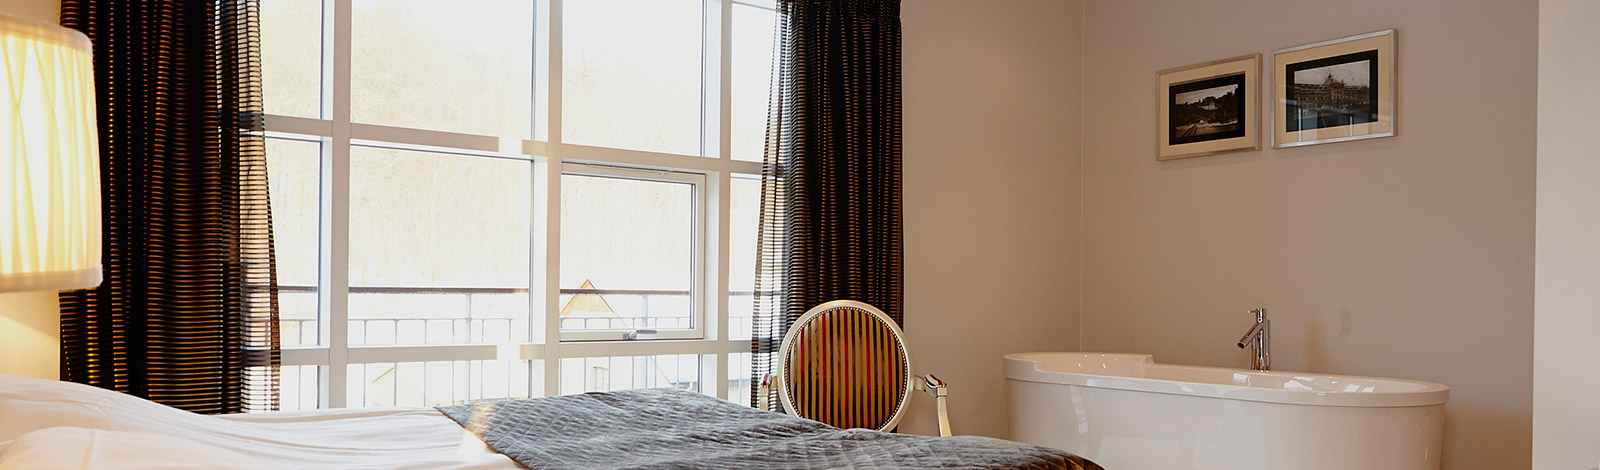 Upgrade your stay with a lovely junior suite